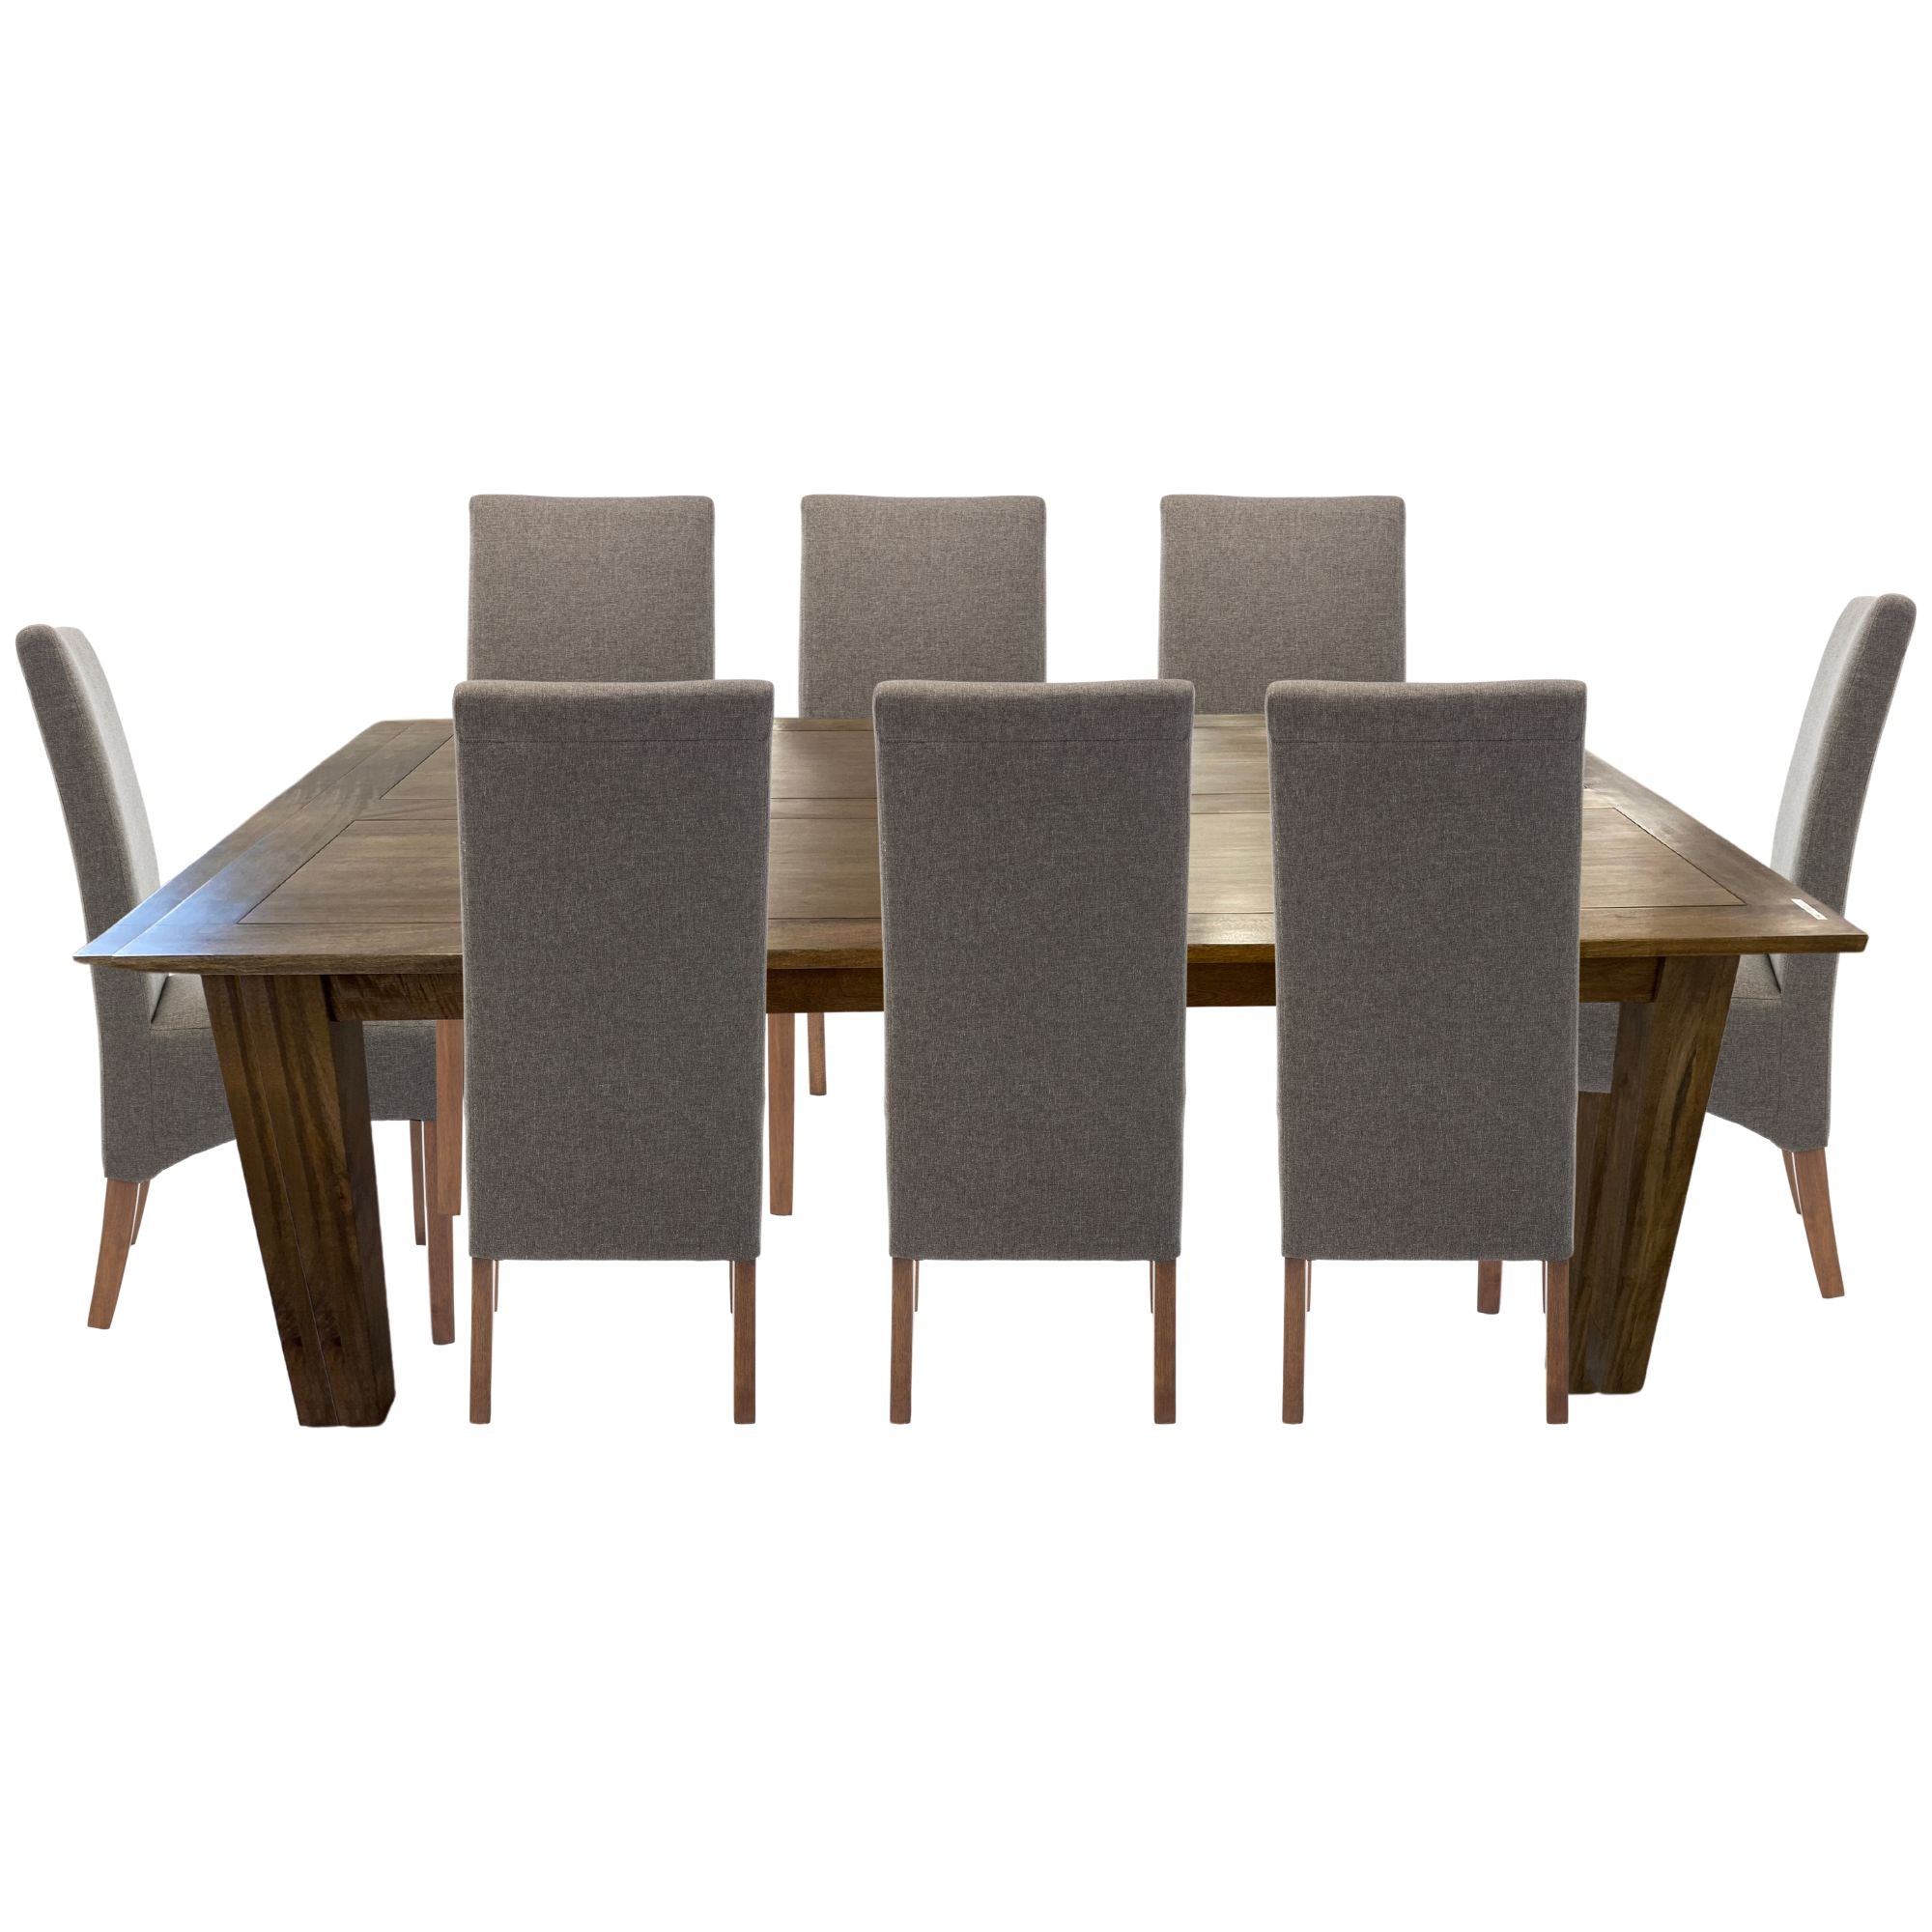 Aksa Fabric Upholstered Dining Chair Set of 4 Solid Pine Wood Furniture - Grey Deals499